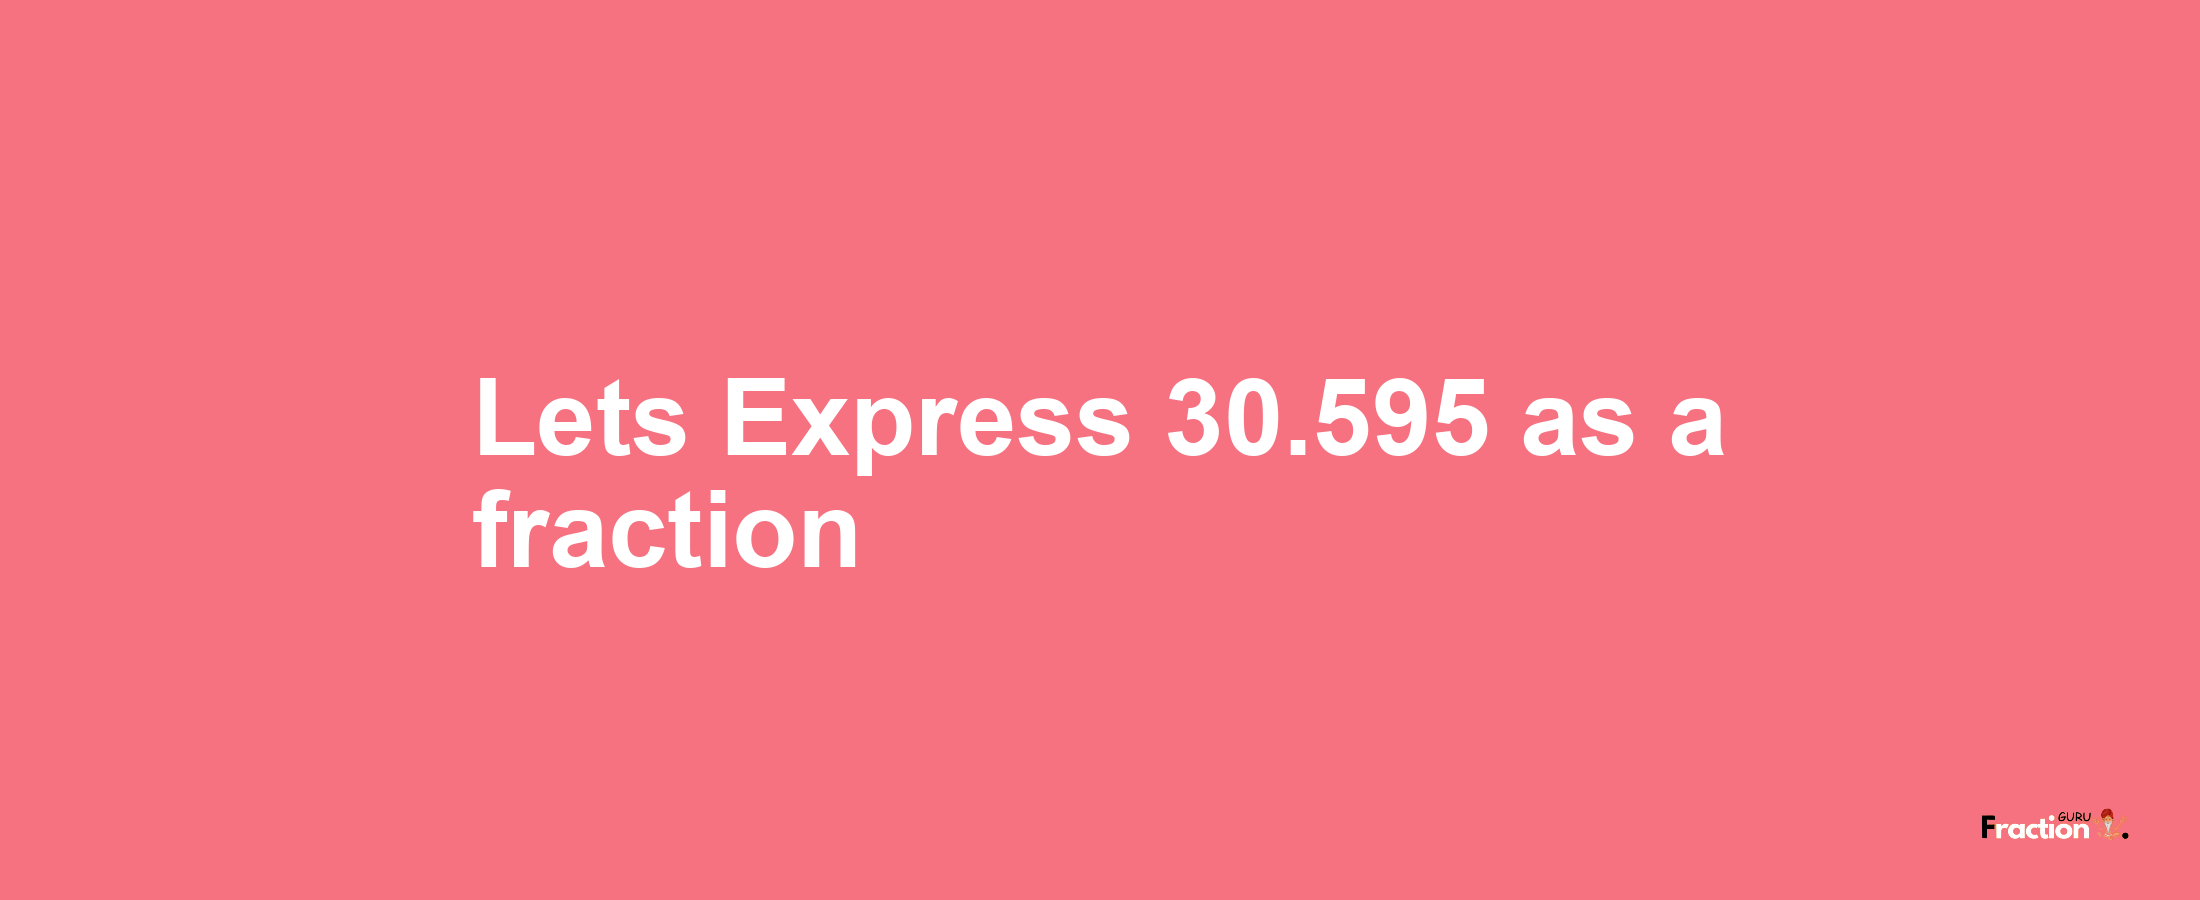 Lets Express 30.595 as afraction